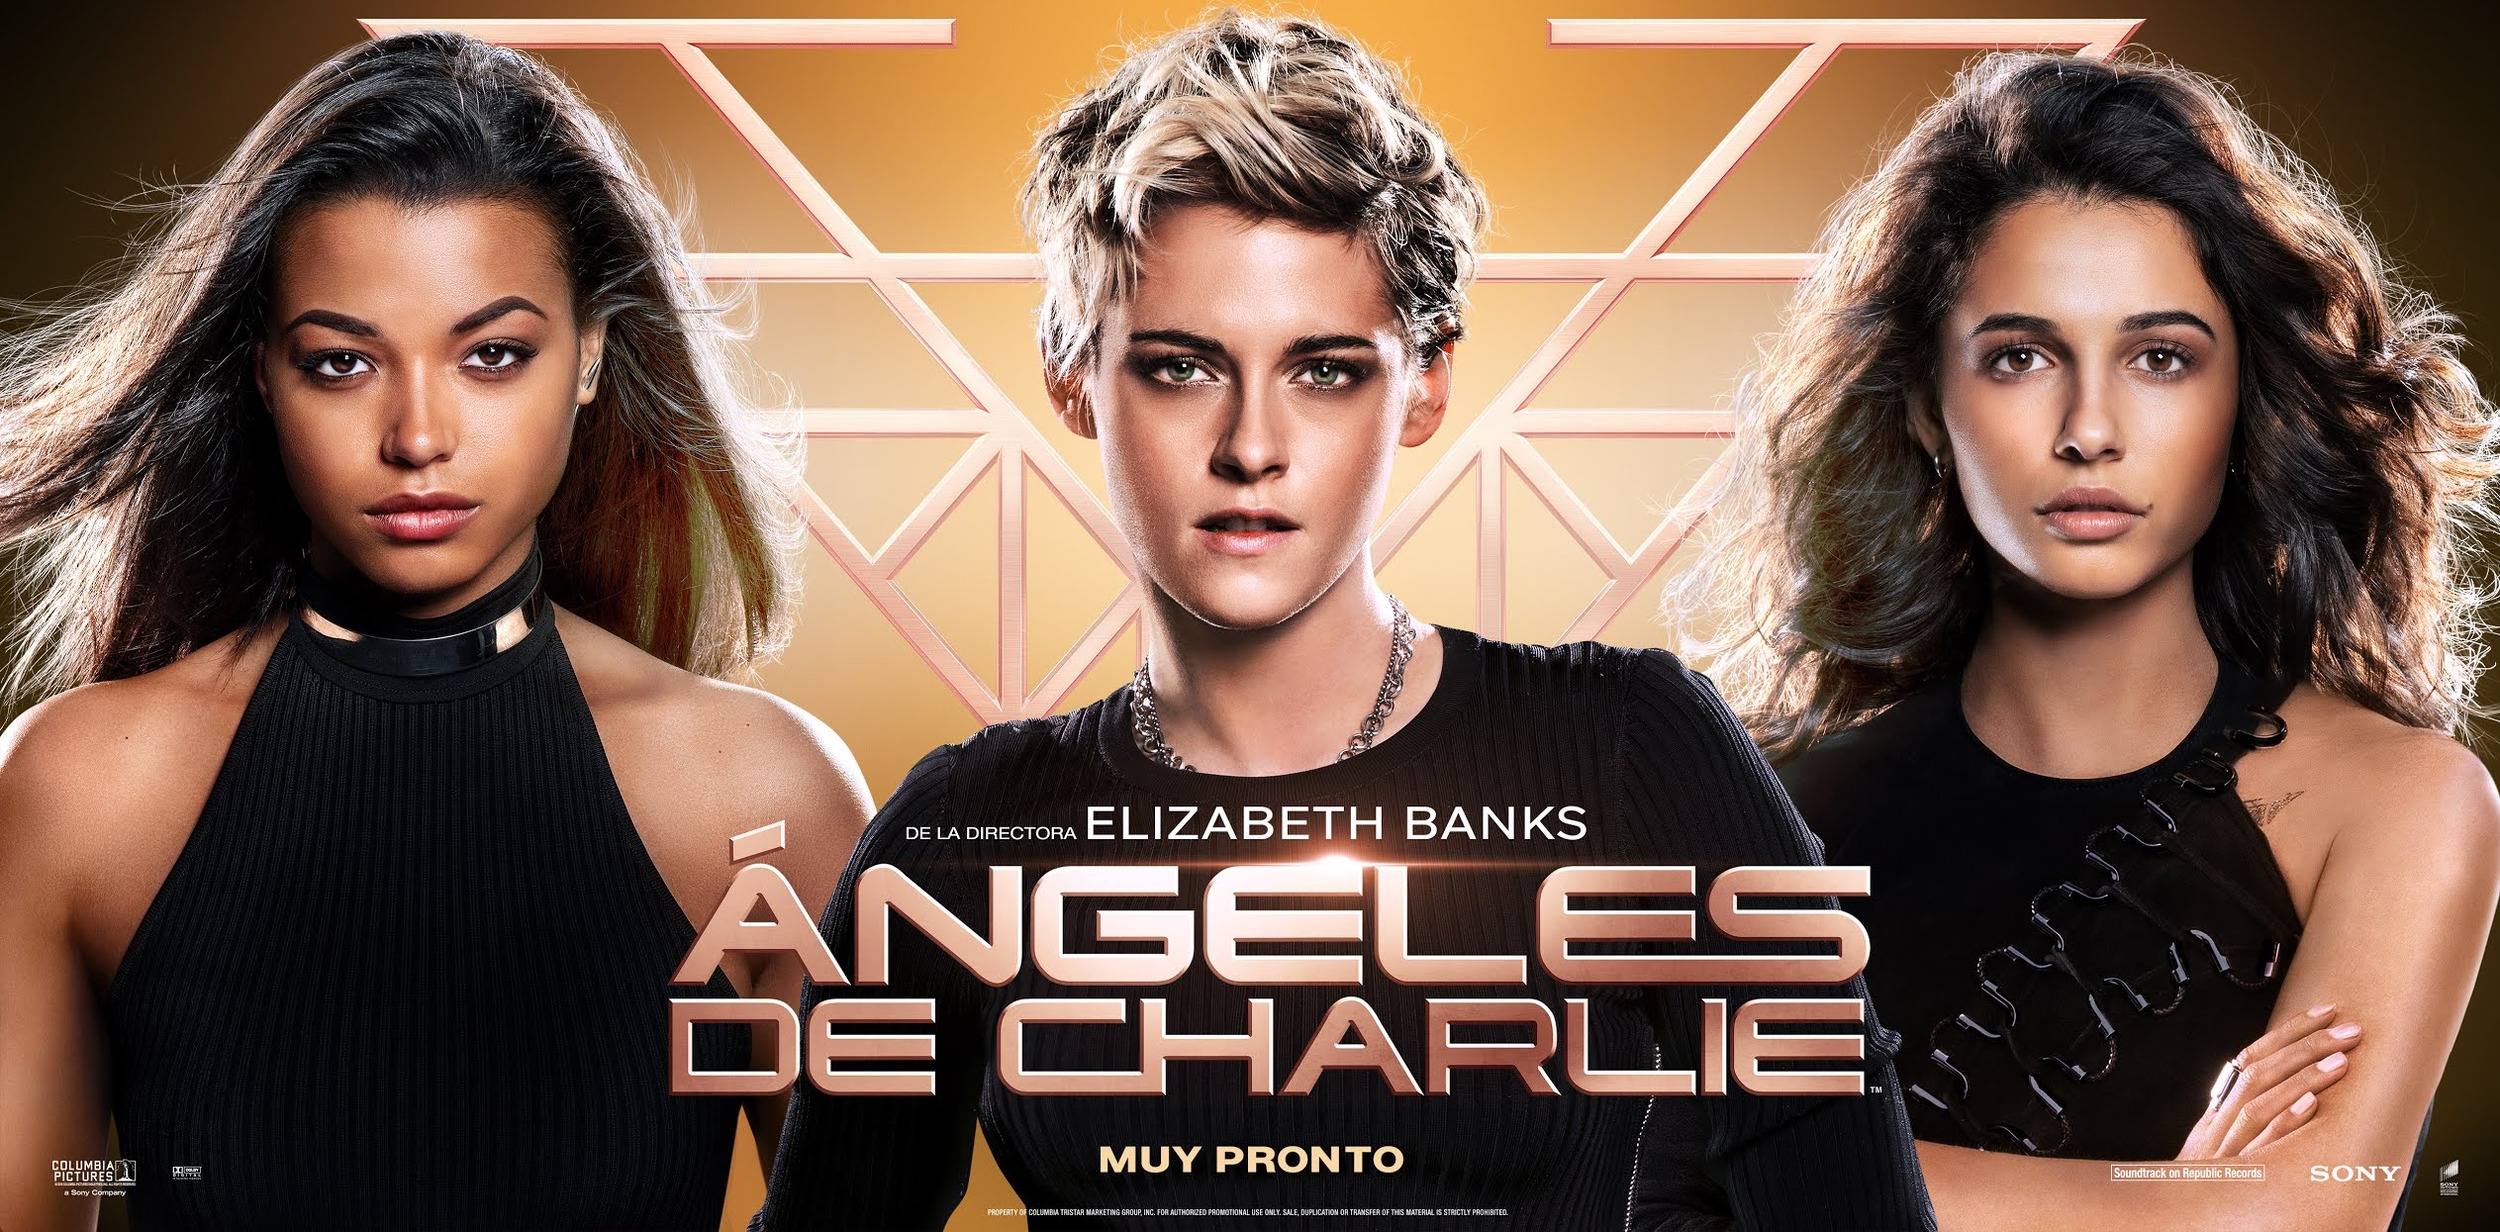 Poster Of Charlies Angels 2019 Movie Wallpapers